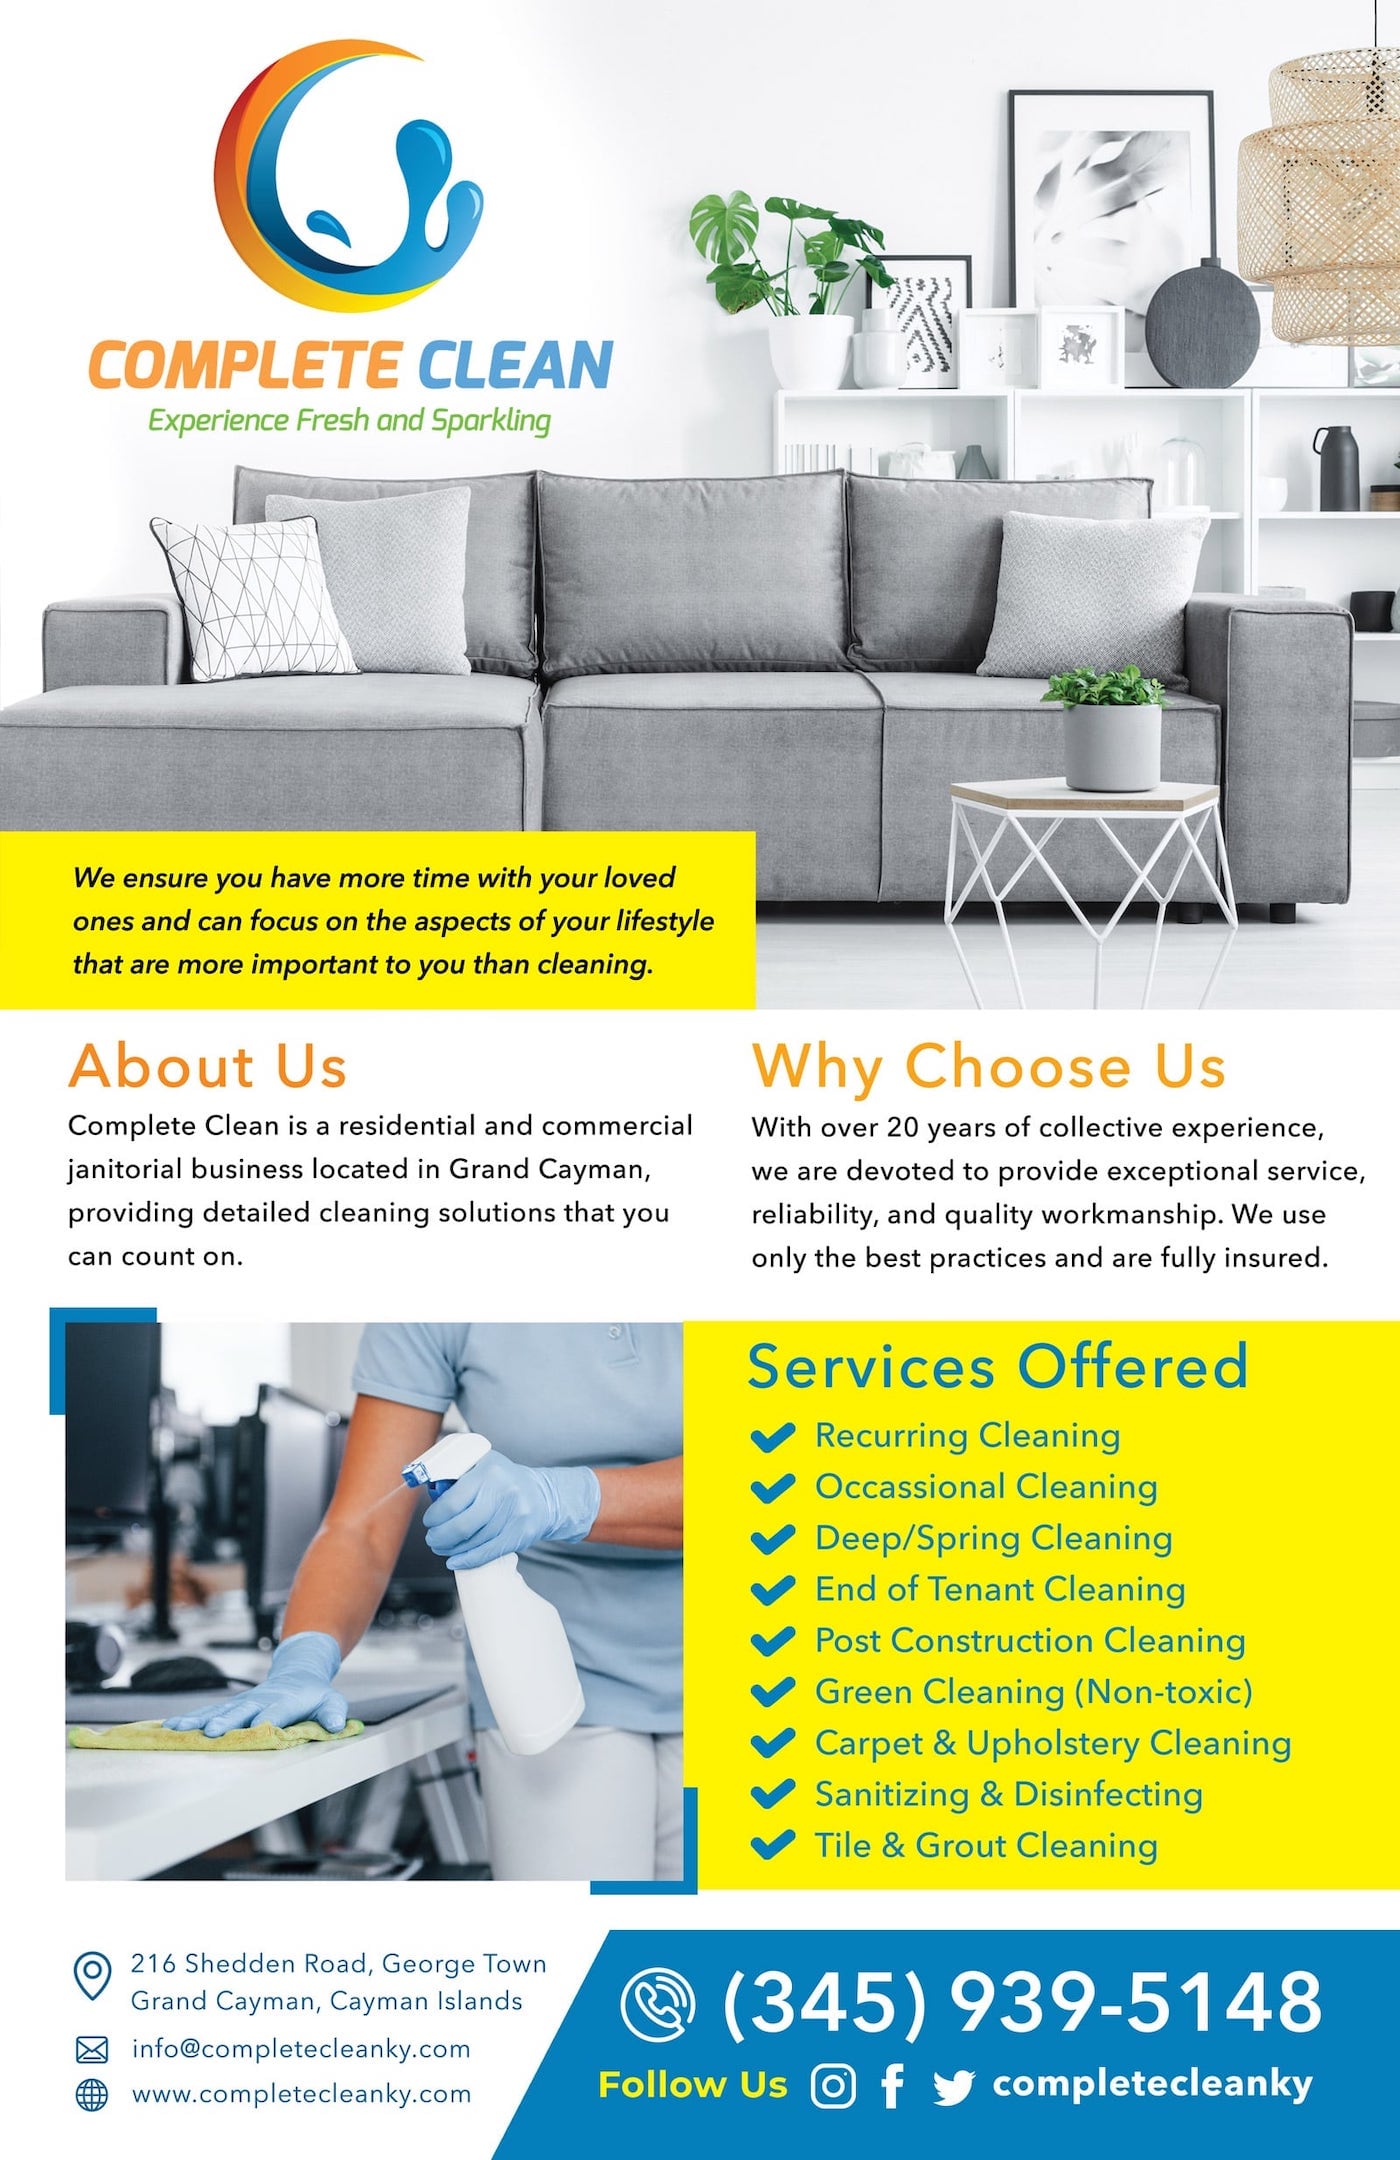 Complete Clean - Cayman Cleaning Services for Homes, Rentals, Apartments, Condos